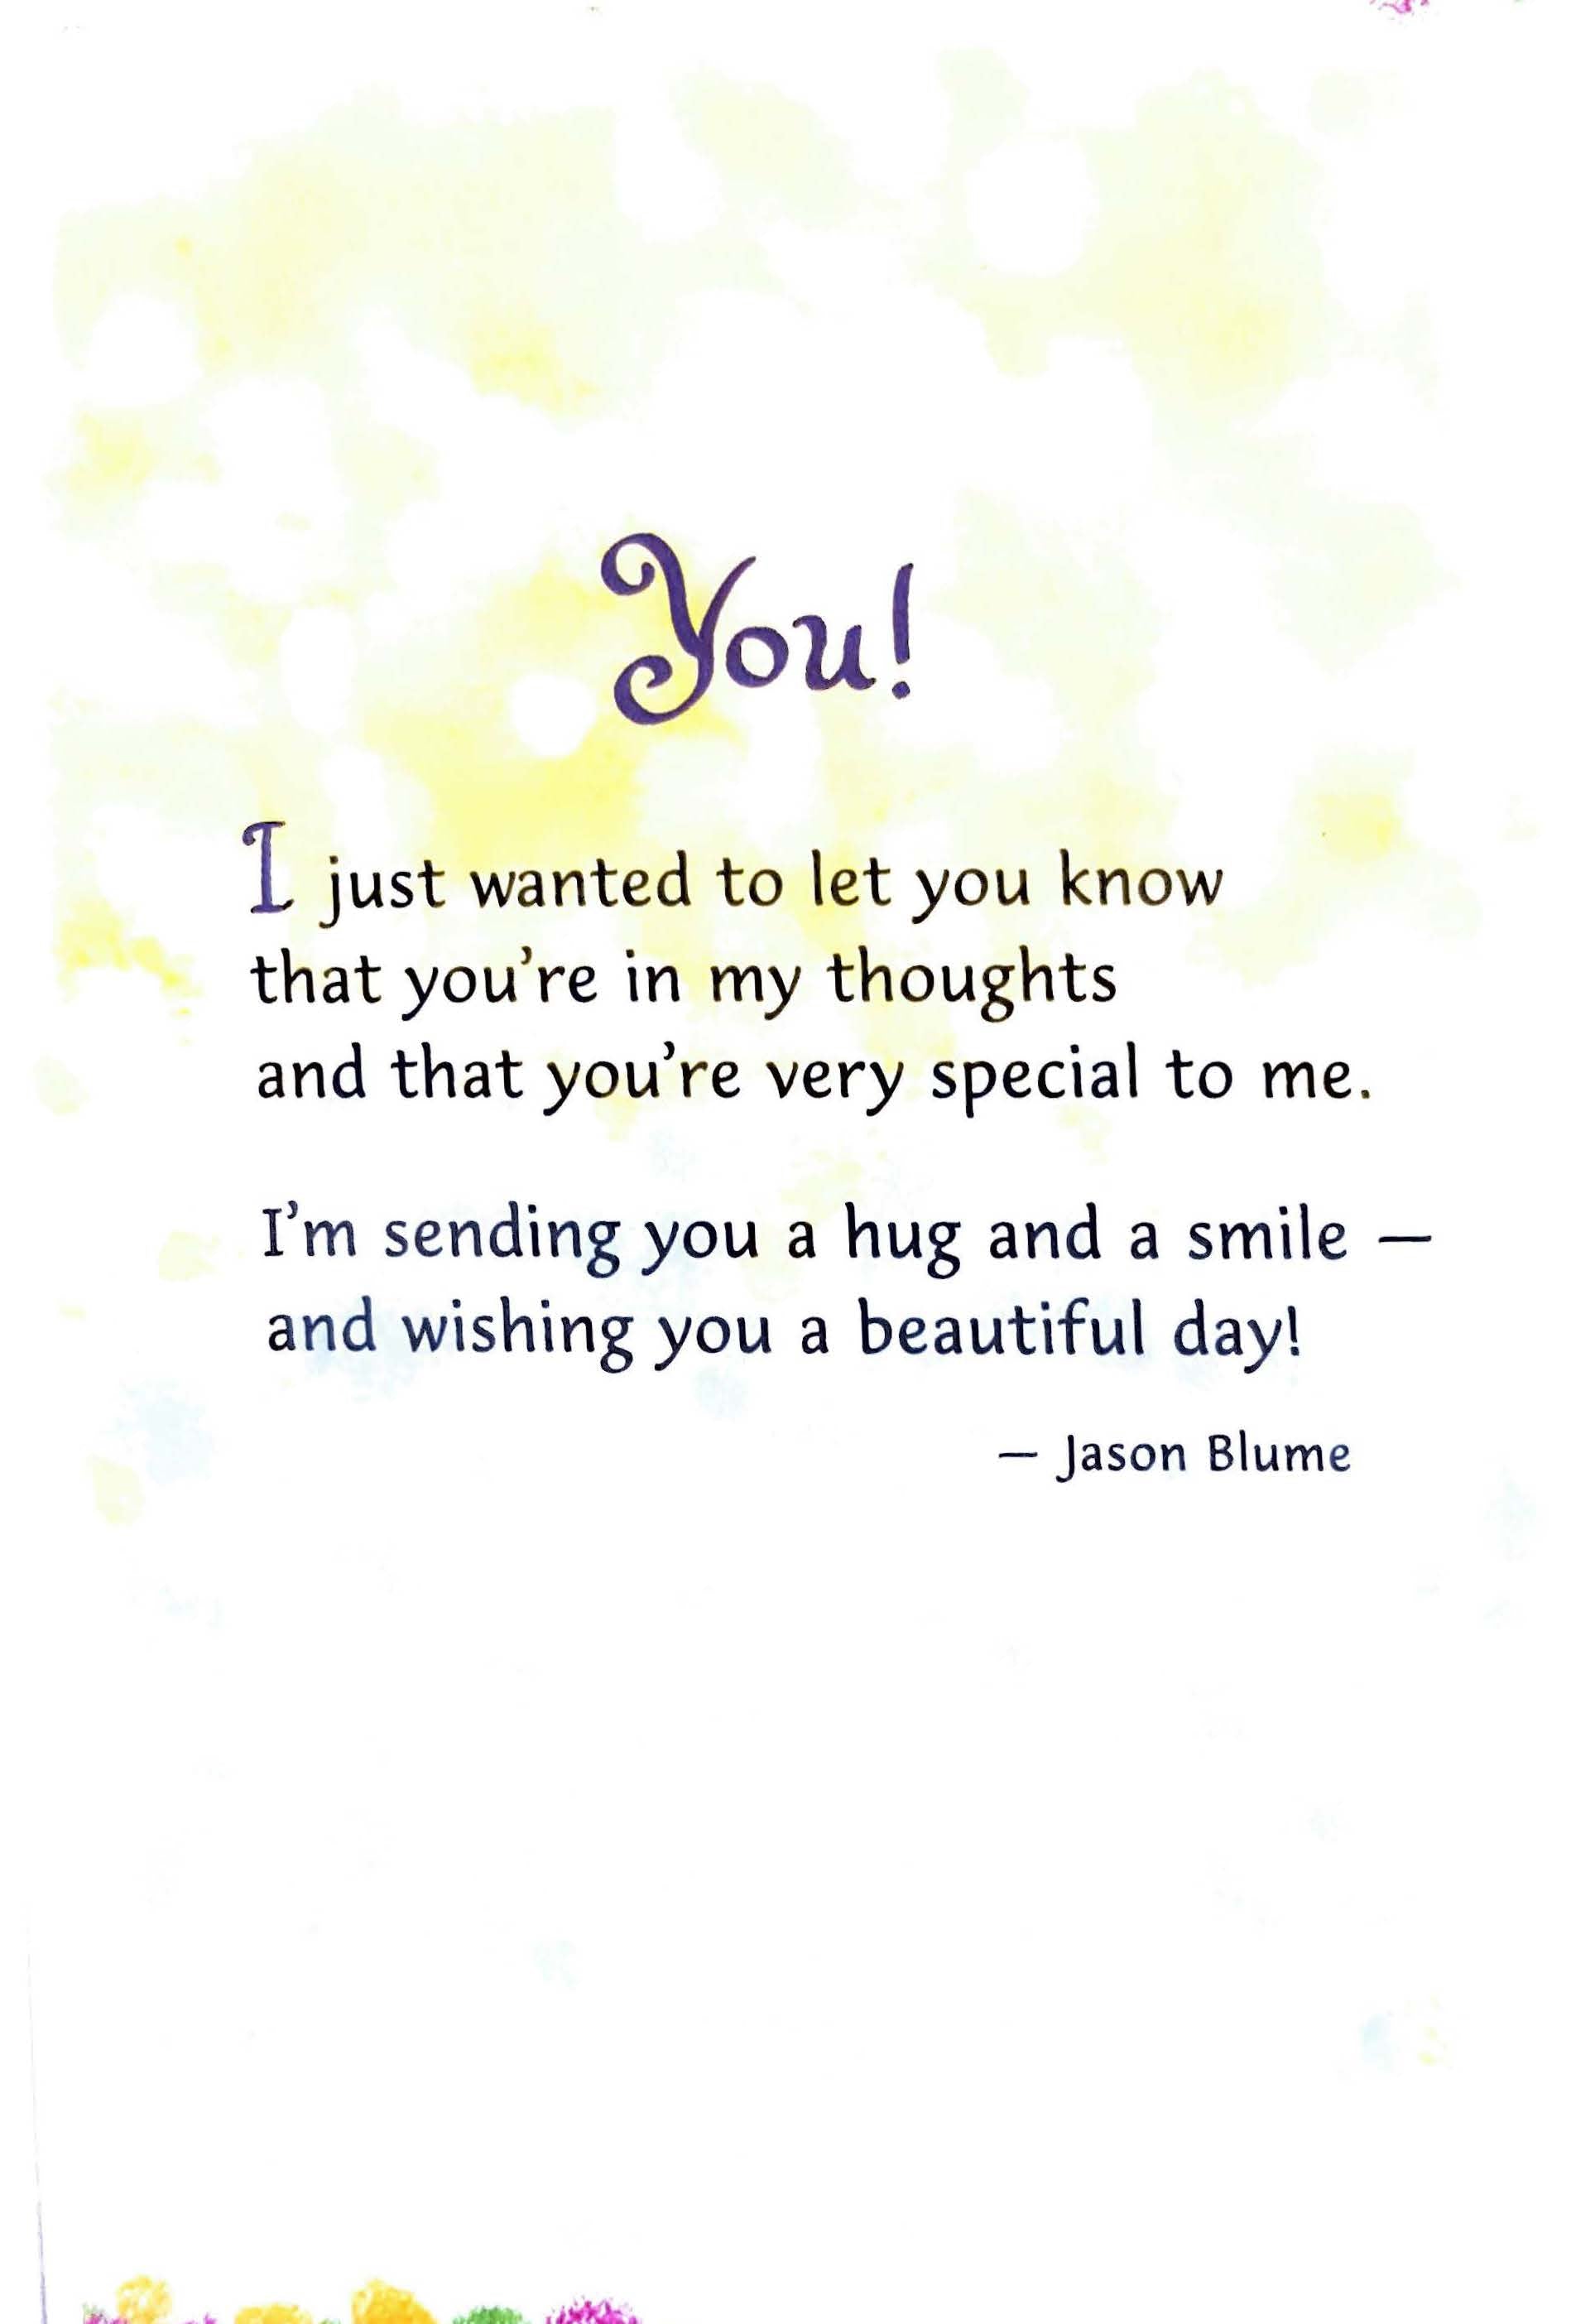 There's A Very Special Reason Card - Thinking of You - Blue Mountain Arts